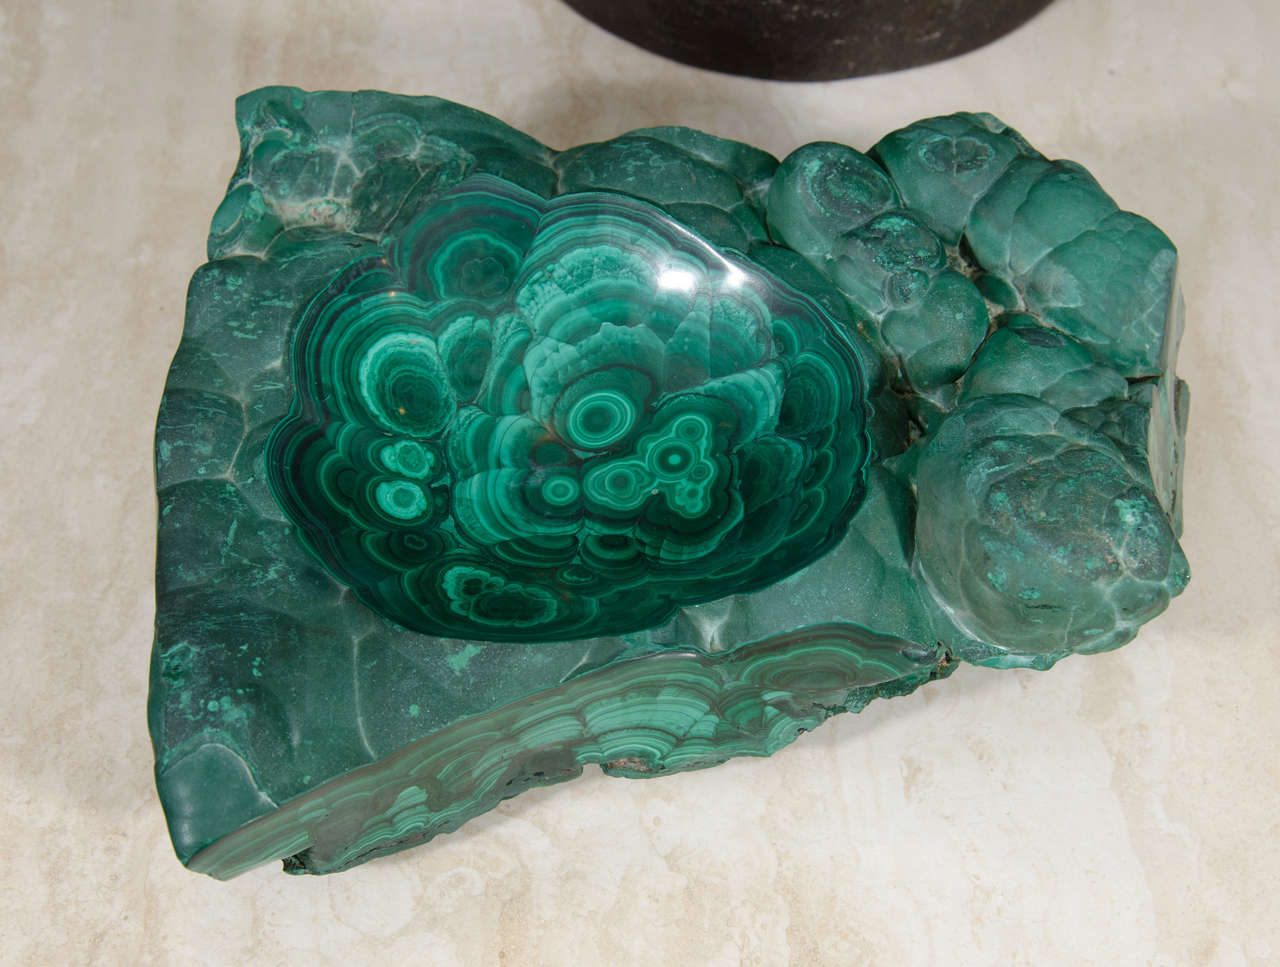 A solid piece of organic Malachite with a shallow bowl carved in the center.